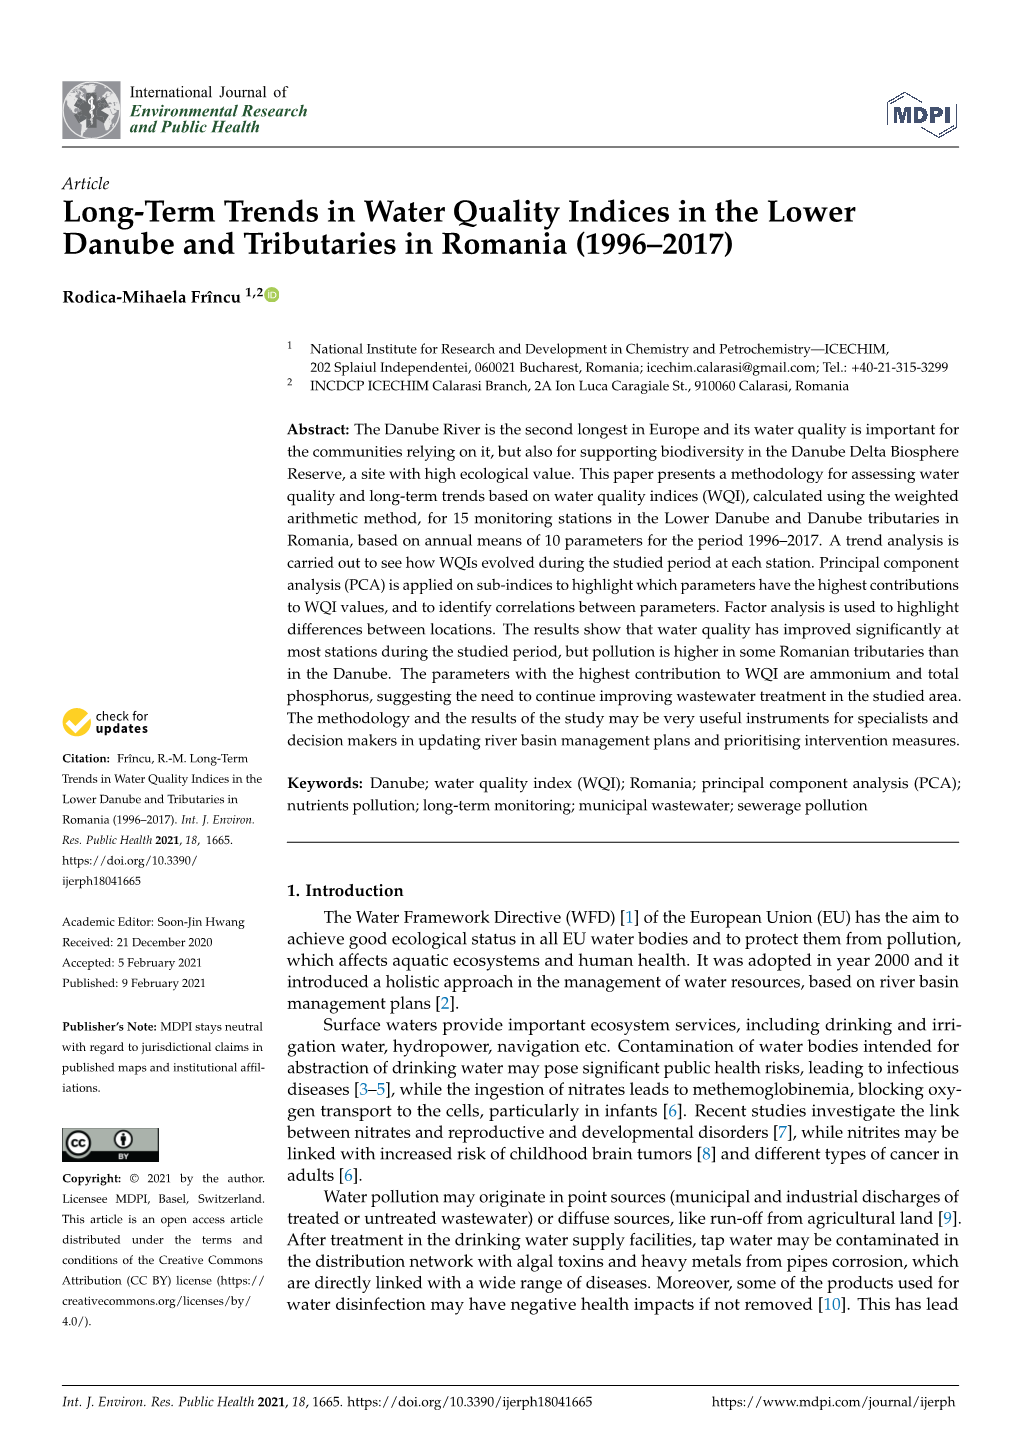 Long-Term Trends in Water Quality Indices in the Lower Danube and Tributaries in Romania (1996–2017)